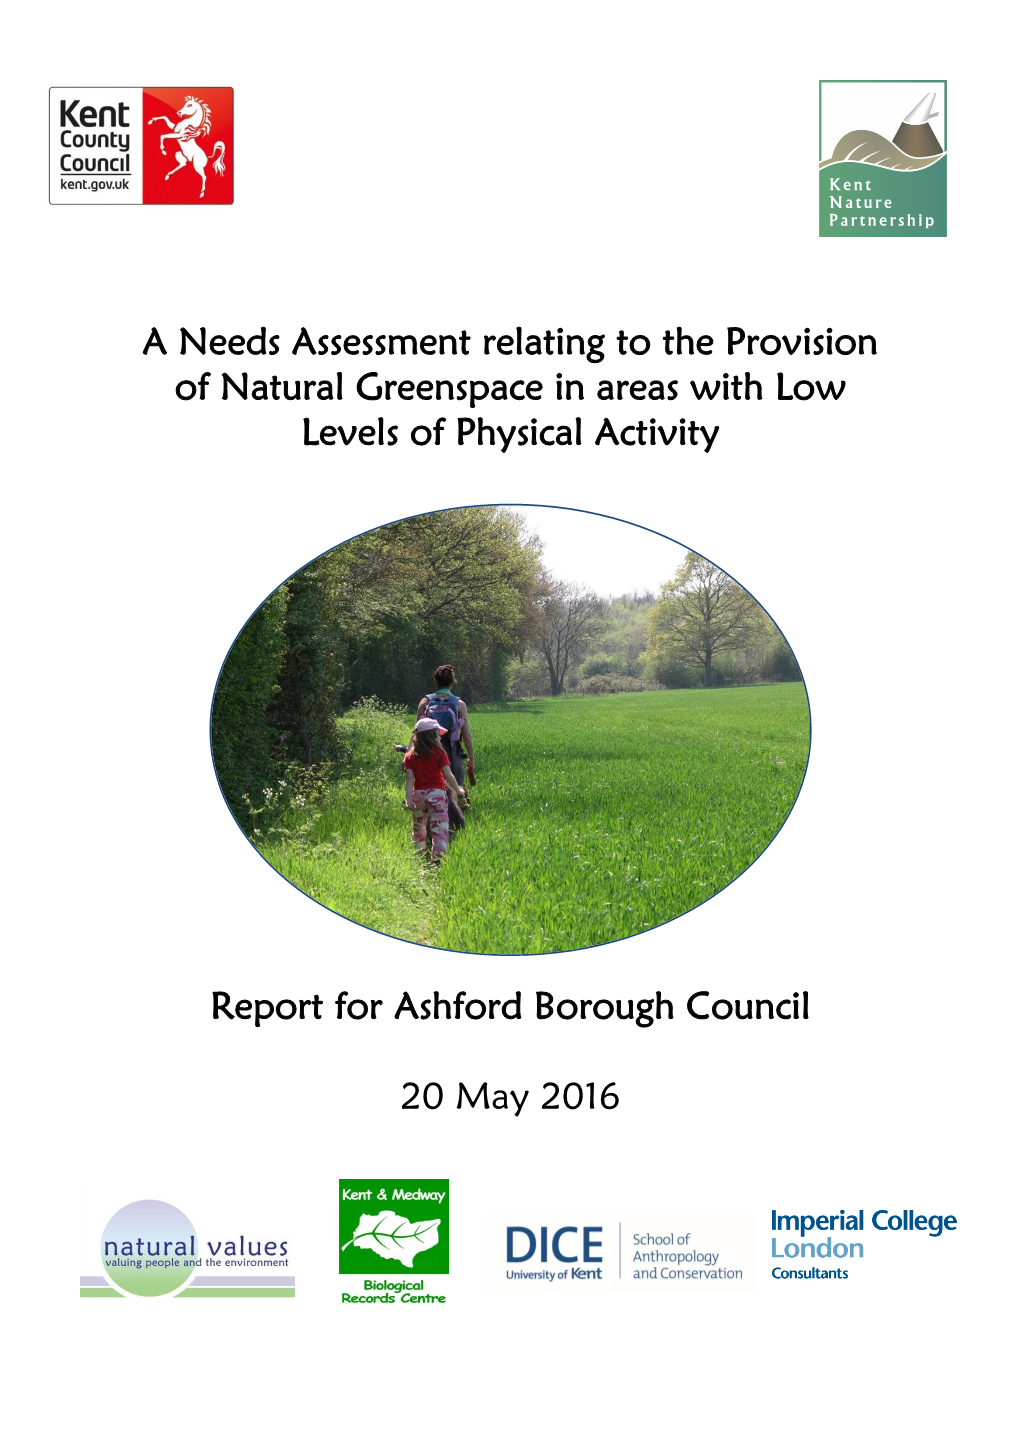 A Needs Assessment Relating to the Provision of Natural Greenspace in Areas with Low Levels of Physical Activity